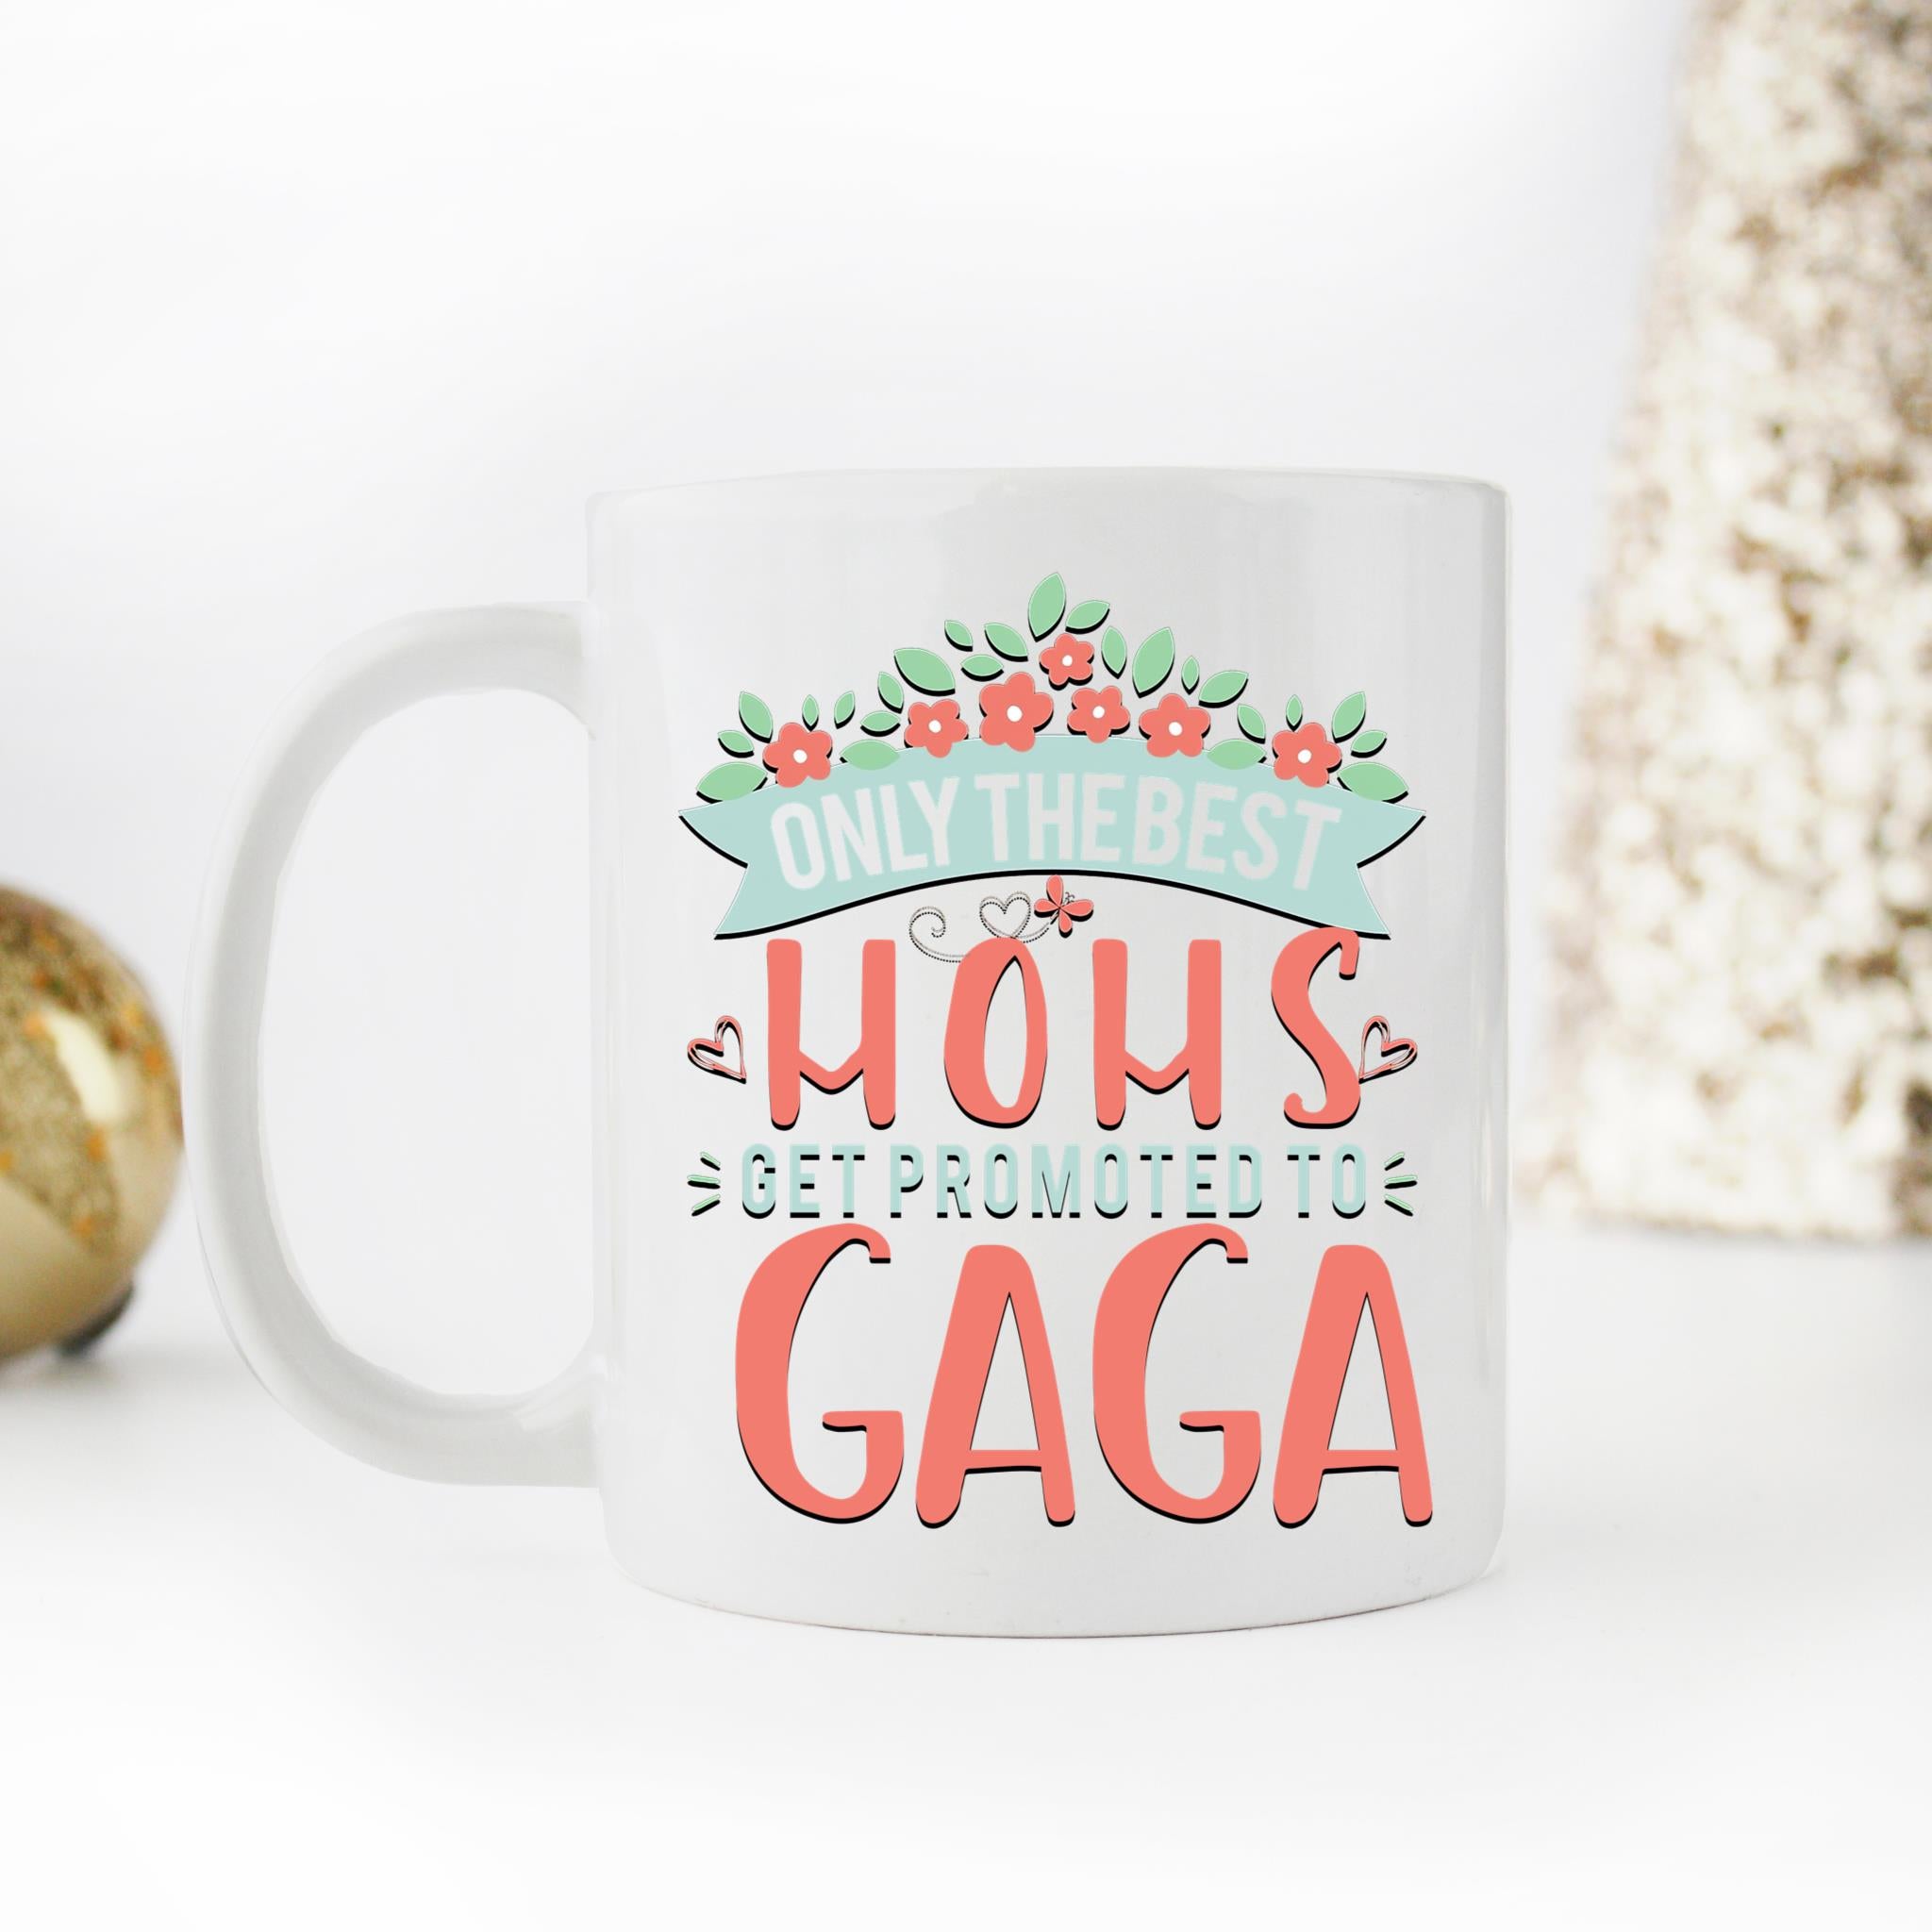 Skitongifts Coffee Mug Funny Ceramic Novelty NH05012022 - Only The Best Moms Get Promoted To Gaga Kirqfcf